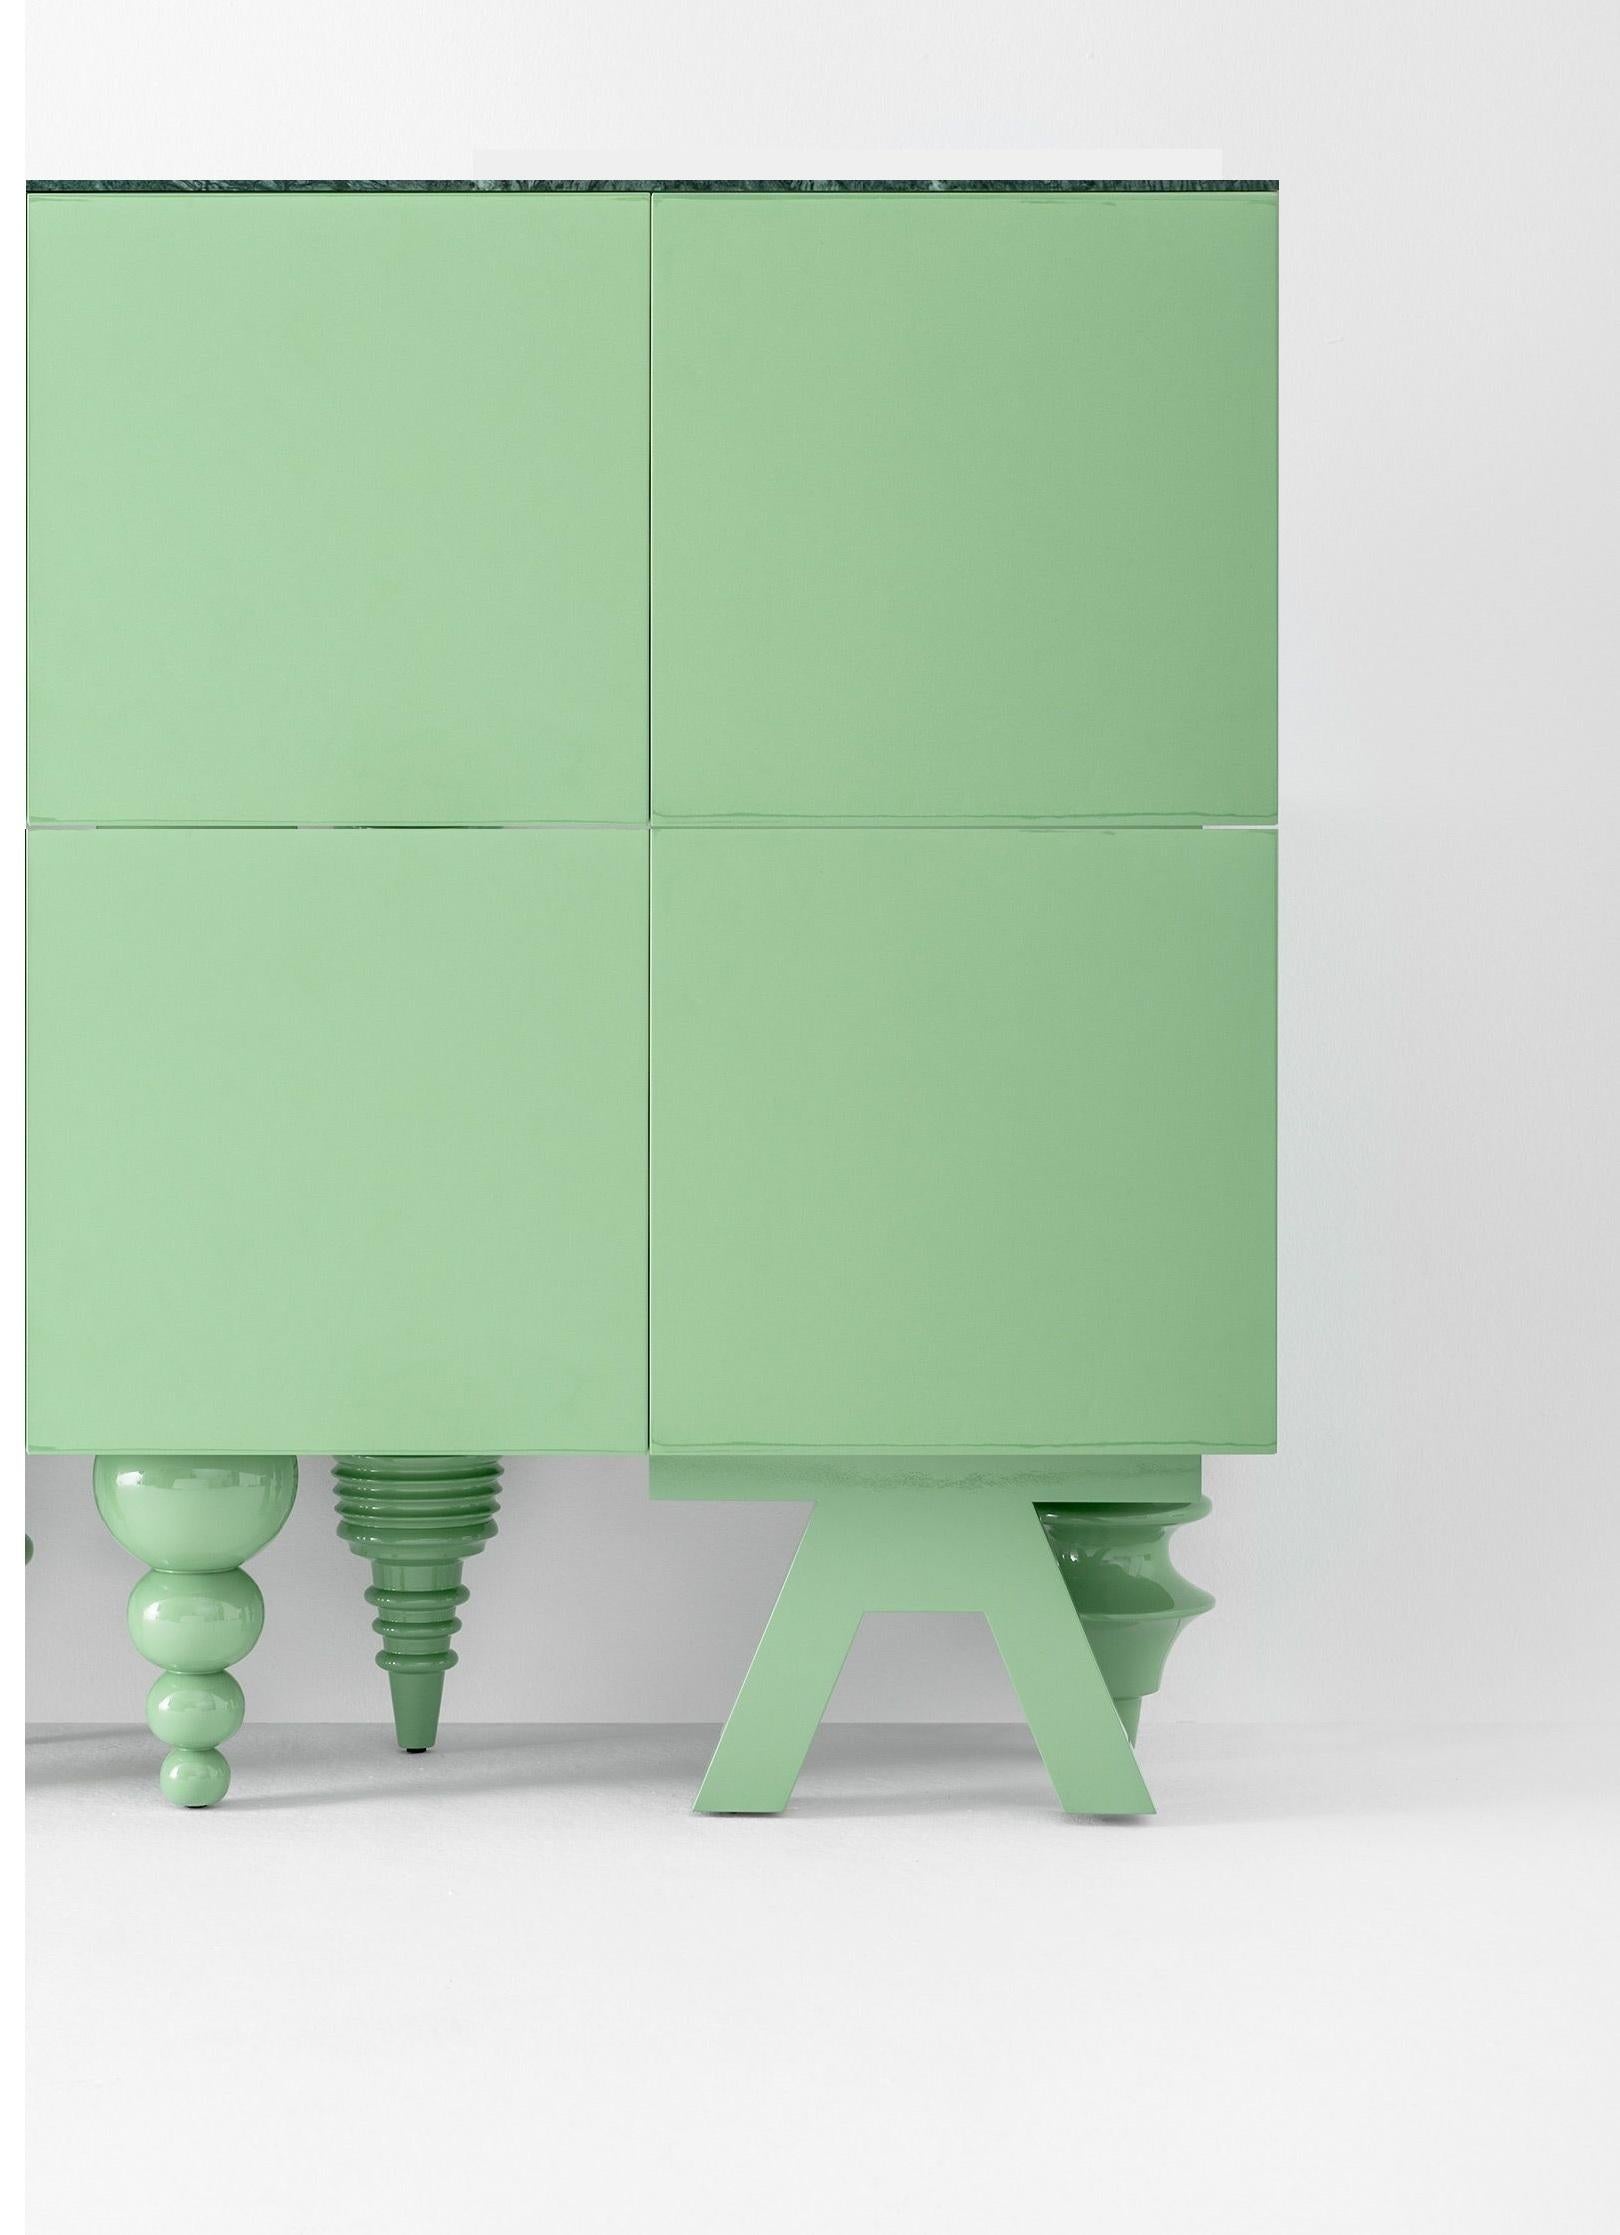 Marble 1 + 1 meter multileg cabinet by Jaime Hayon
Dimensions: D 50 x W 100 x H 130 cm 
Materials: containers, doors, and shelves in MDF with different widths. Legs in turned solid alder wood. Monochrome lacquered finishes are available in green